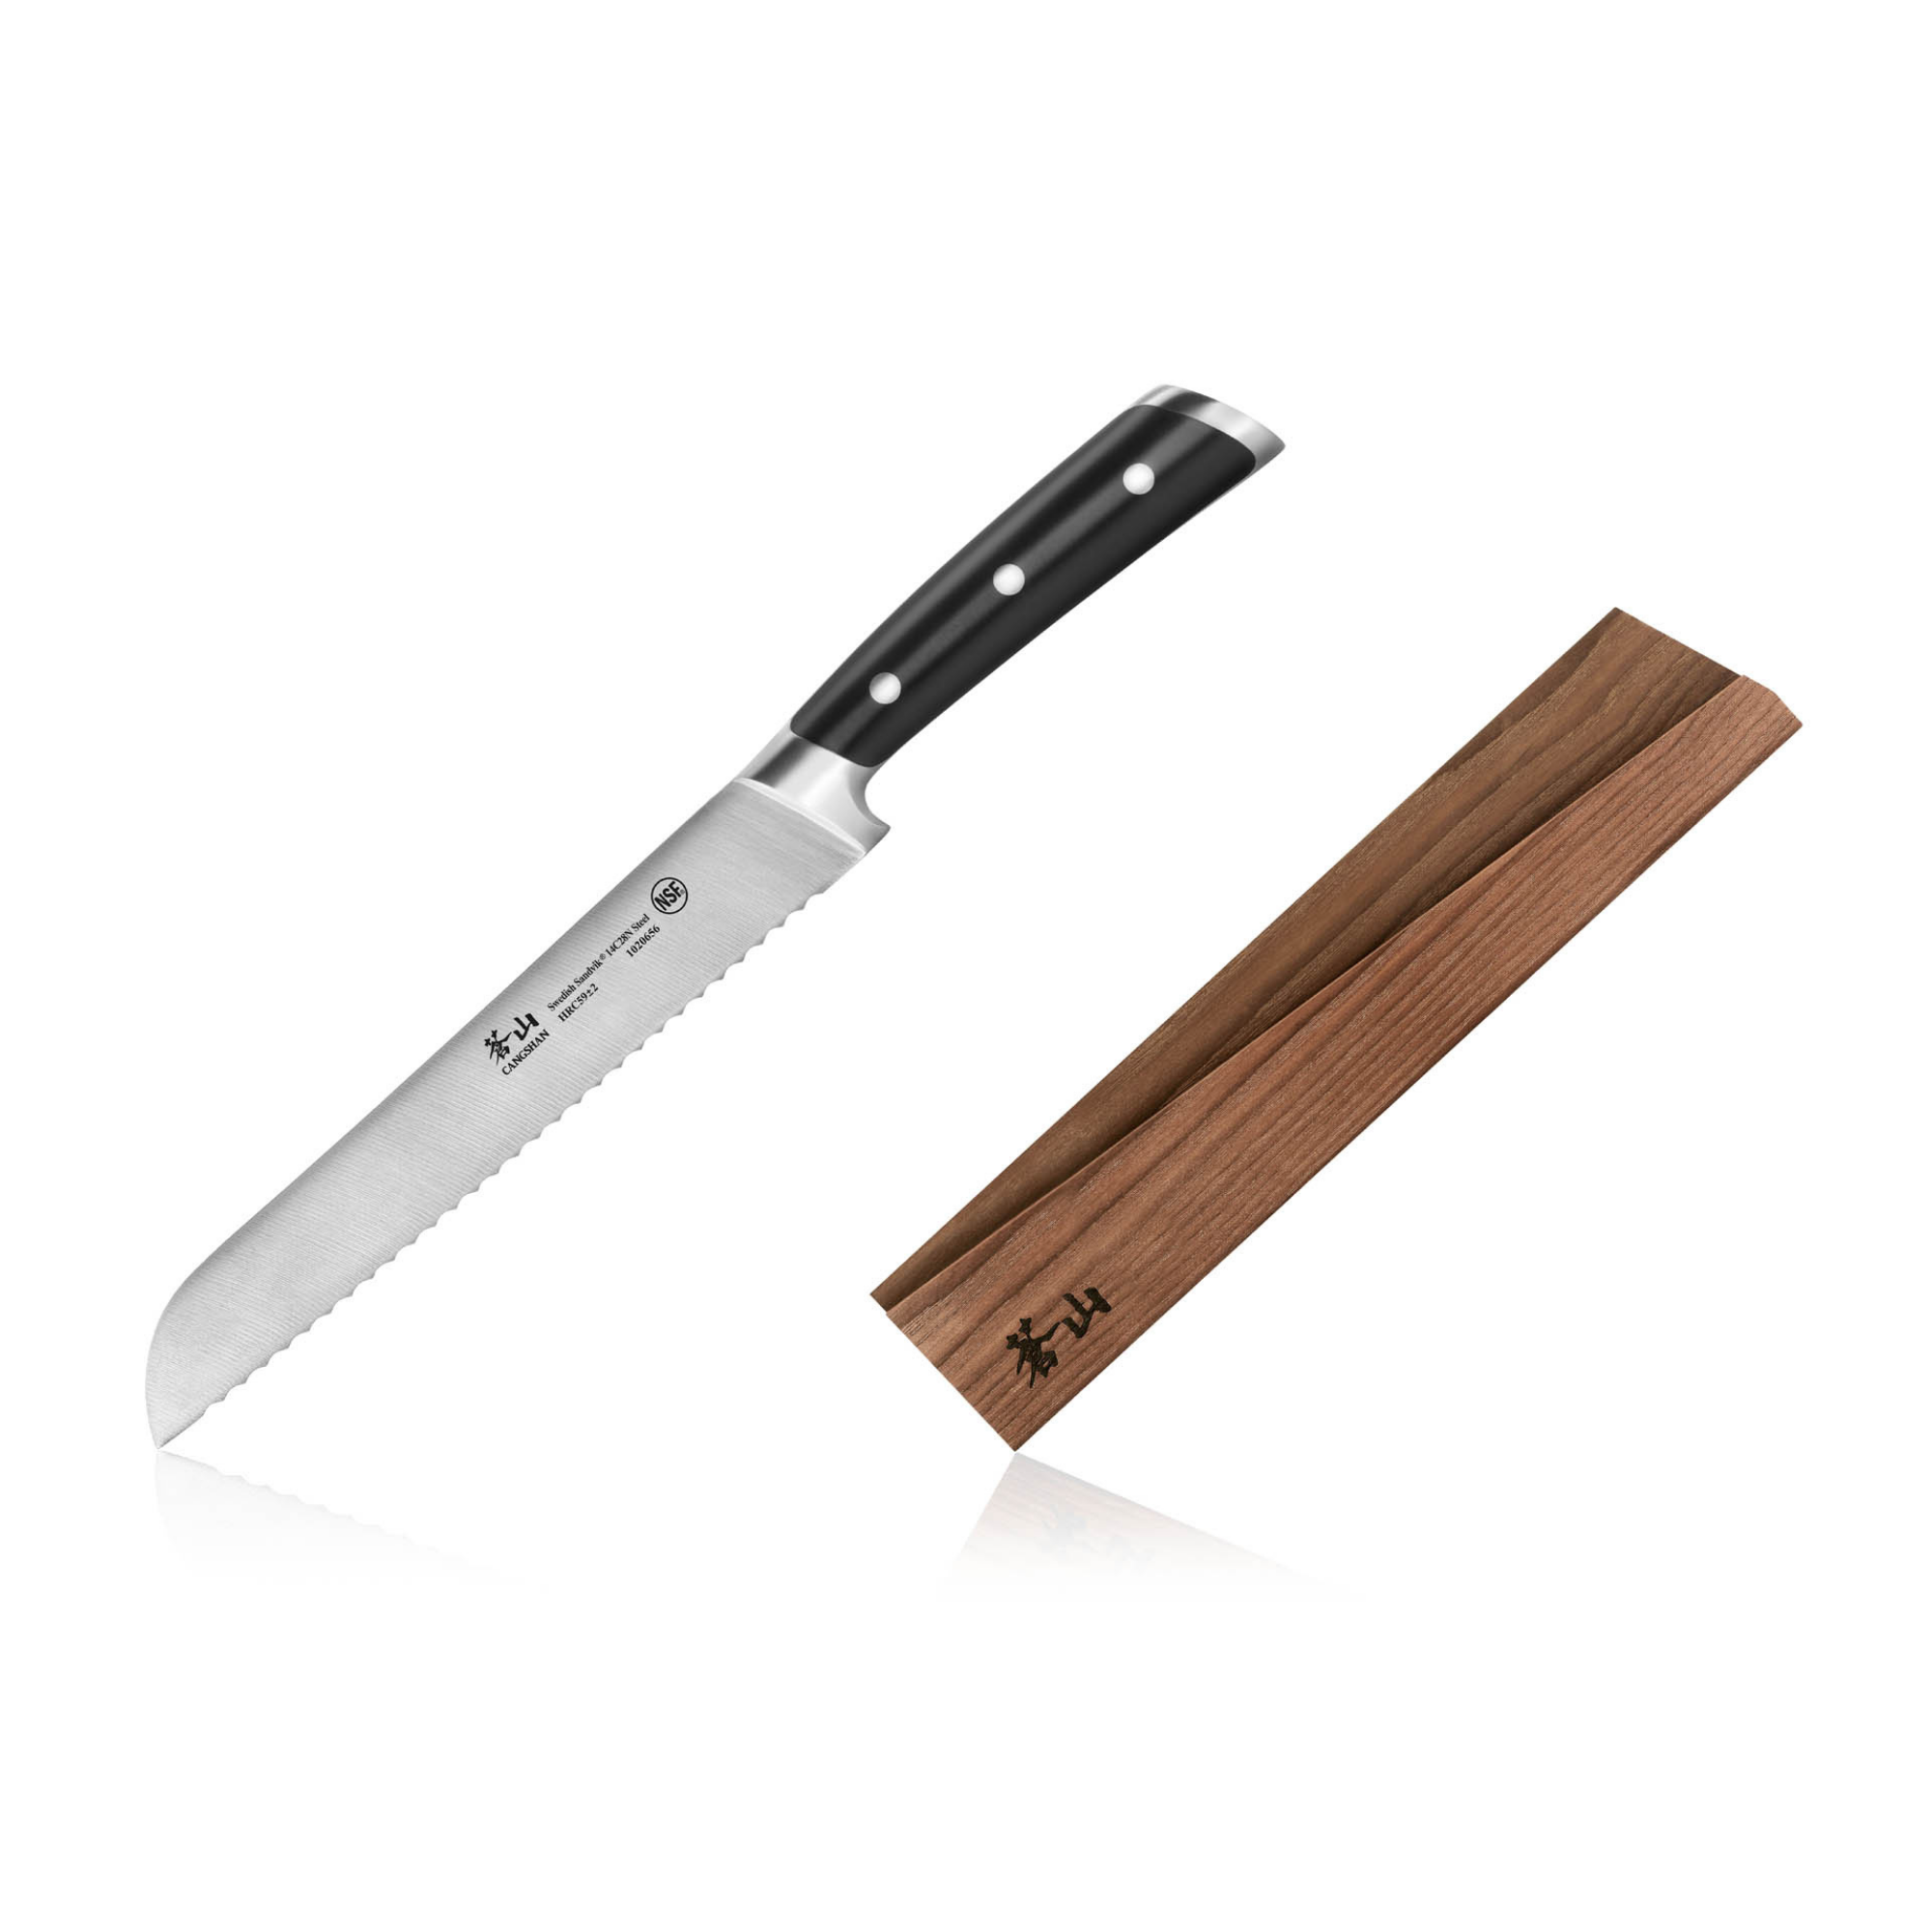 Bread Cutting Board Server with 15” Stainless Steel Bread Knife